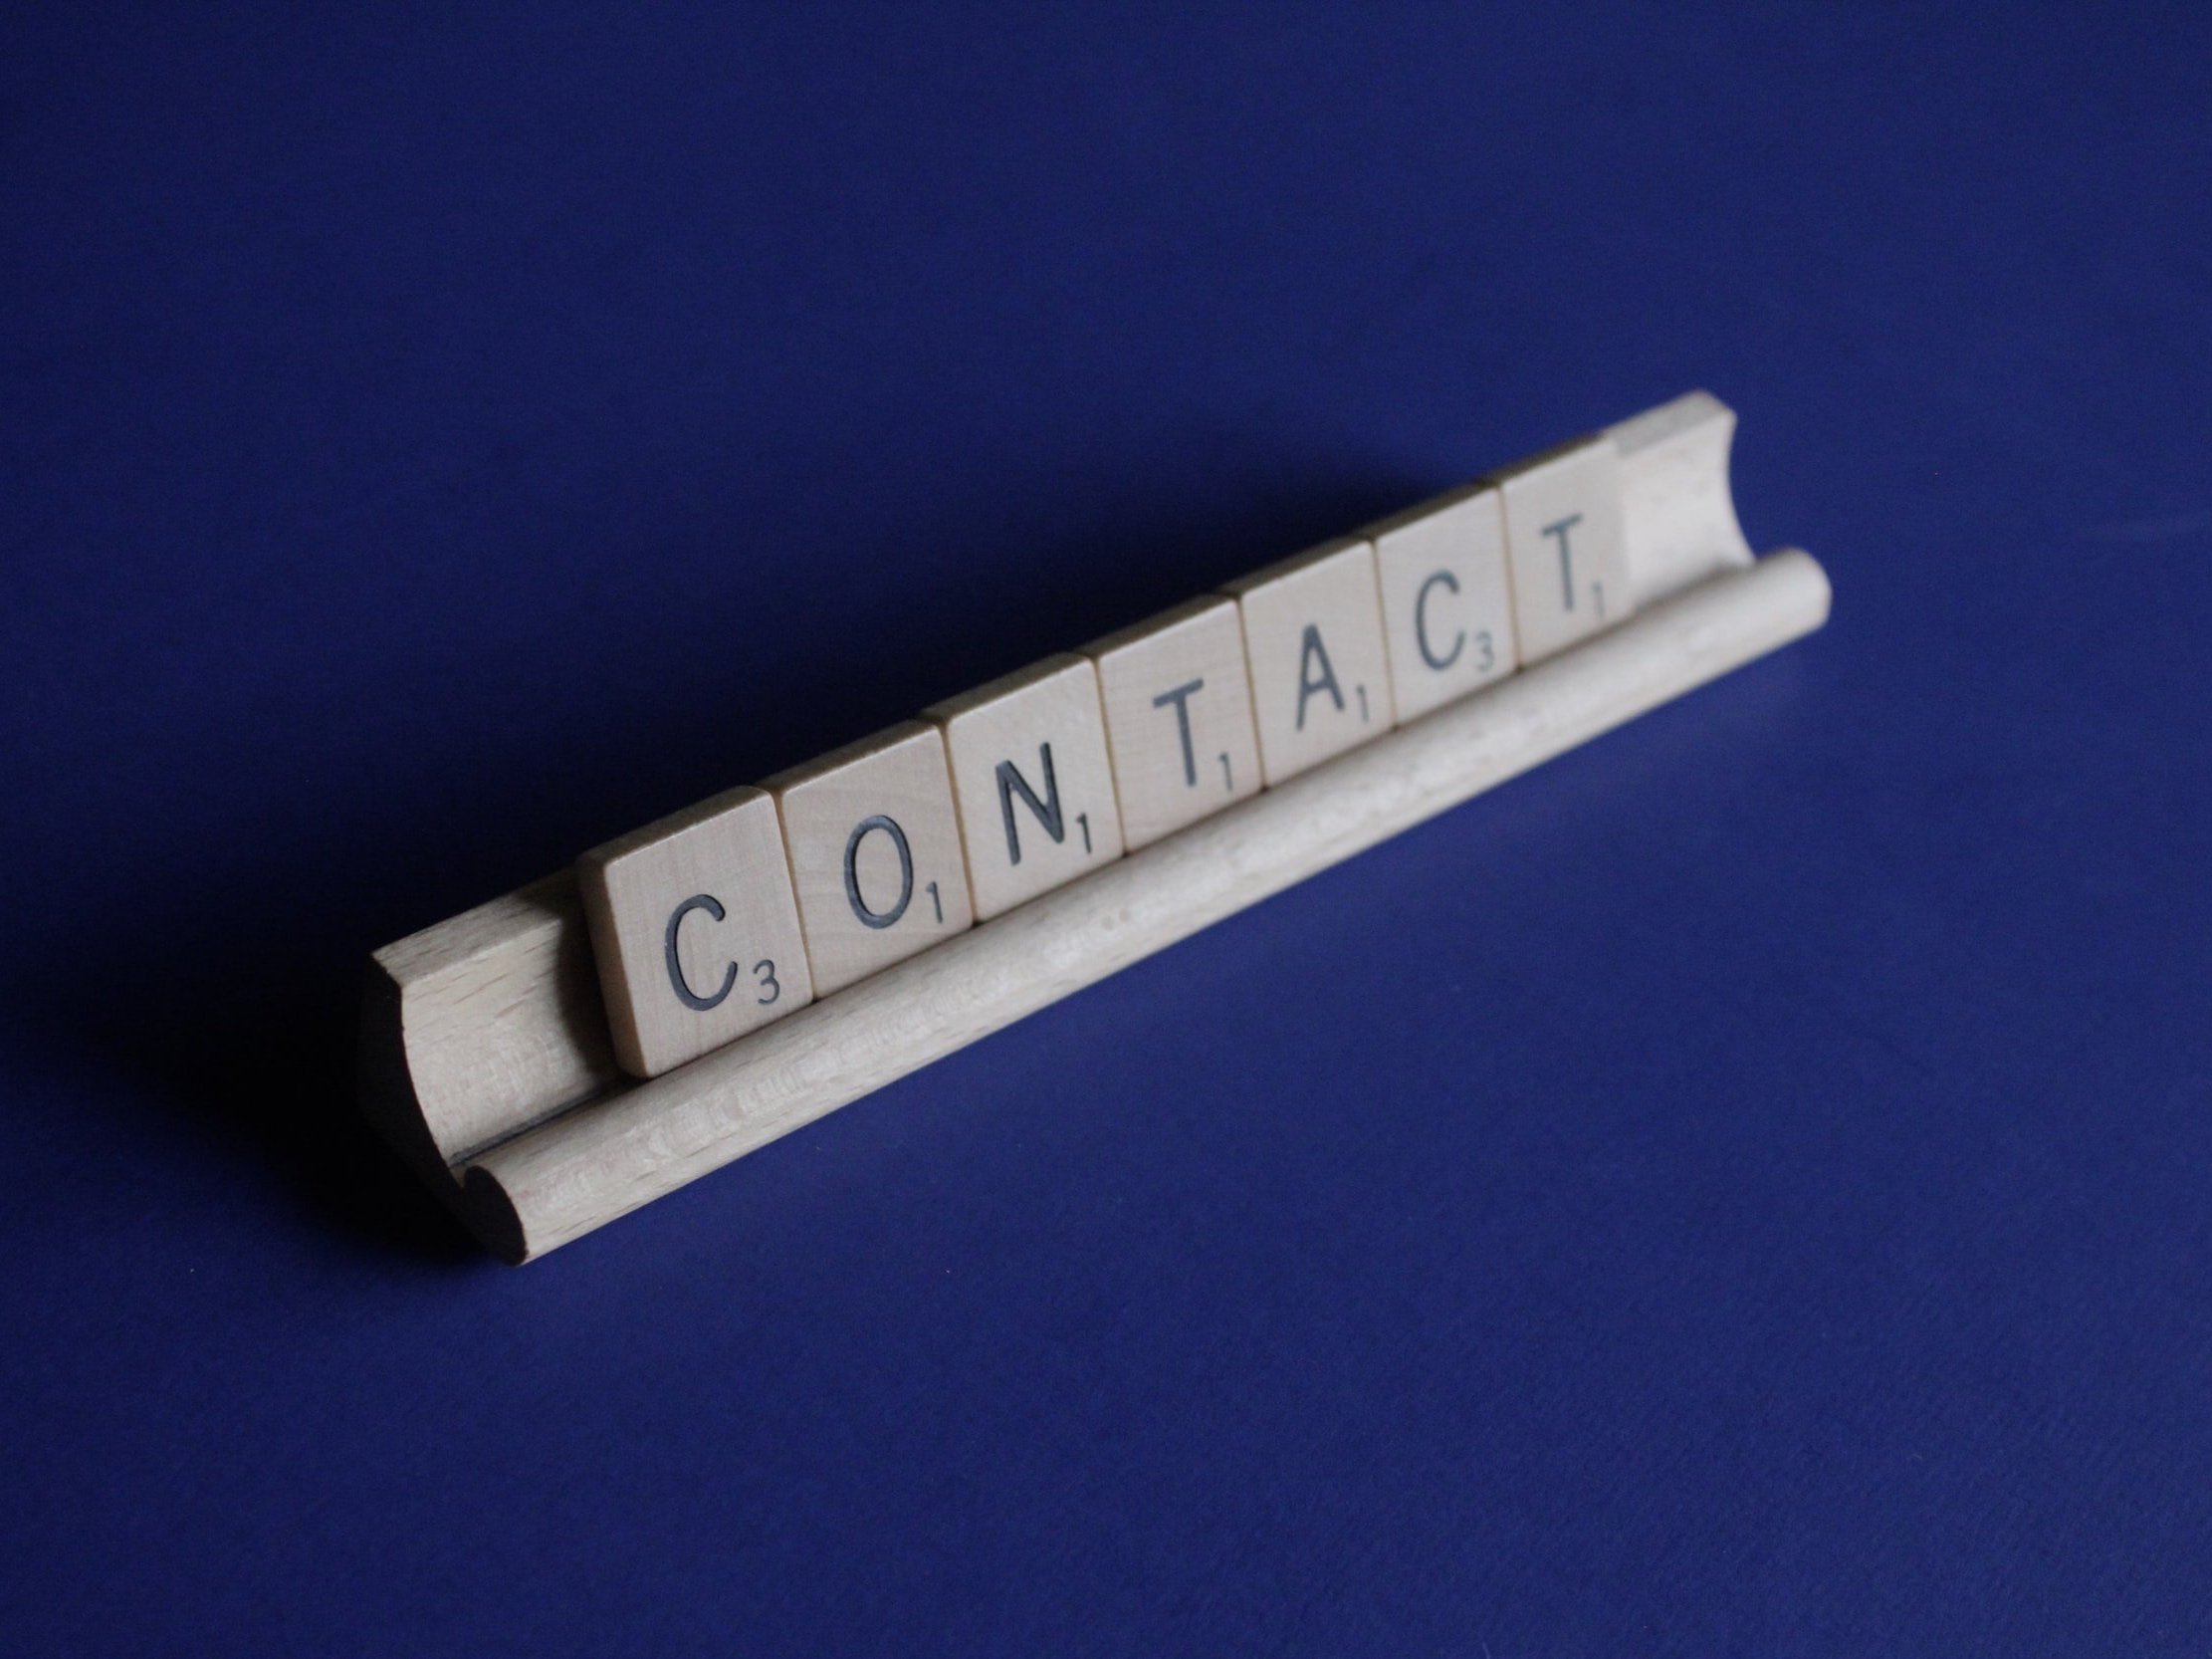 The word "Contact" is written in wooden alphabet tiles.